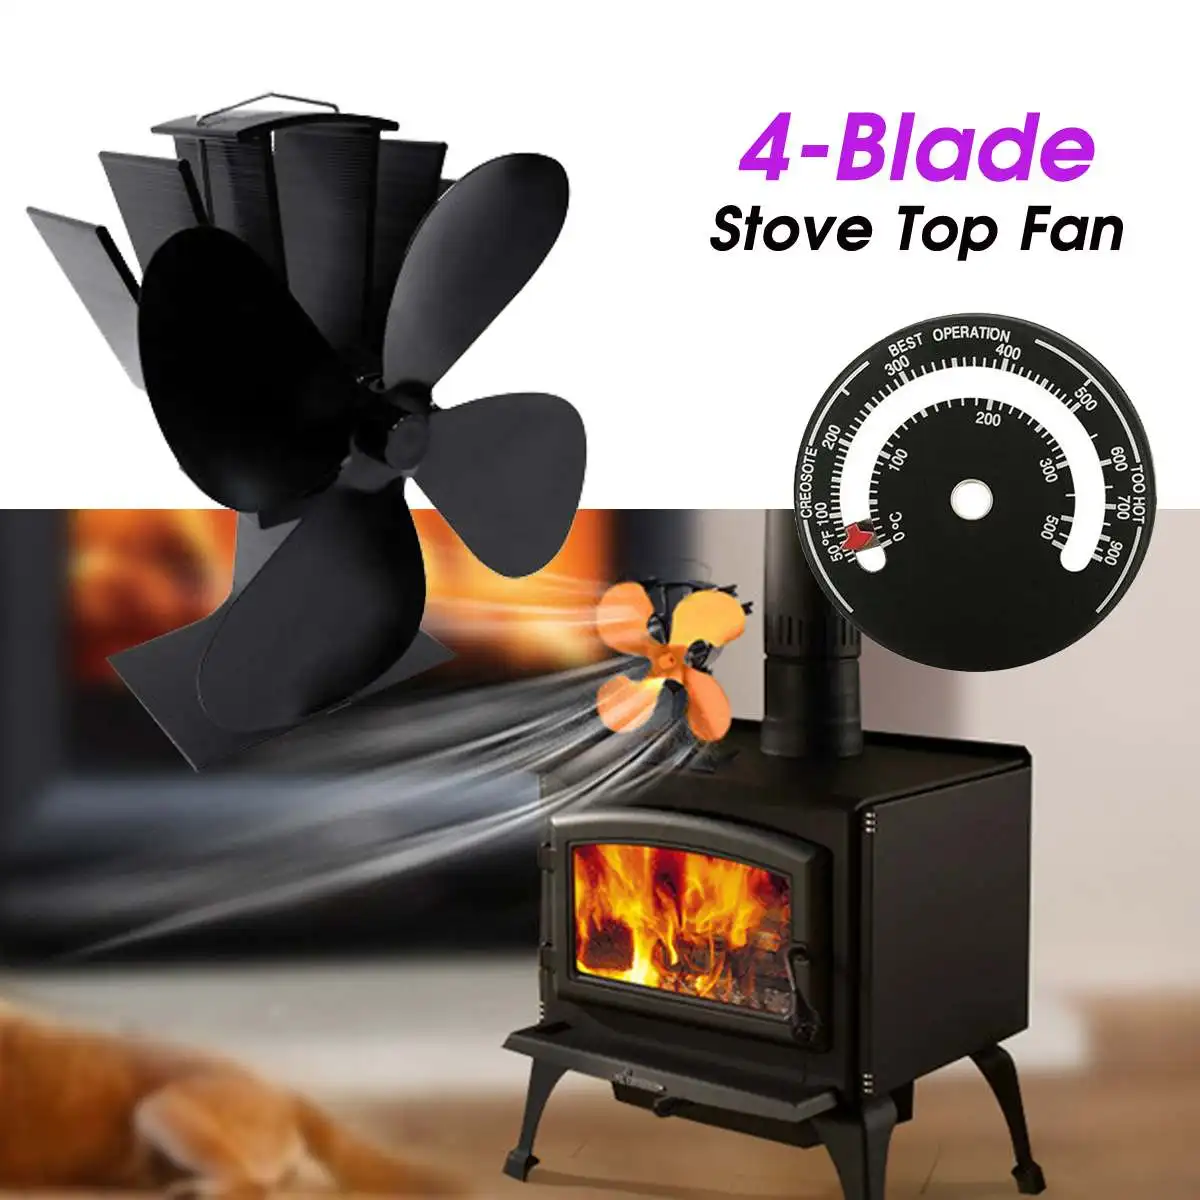 2/3/4 Blade Stove Fan Mini Heat Powered Stove Top Fan 22.5cm Height for Super Small Space on